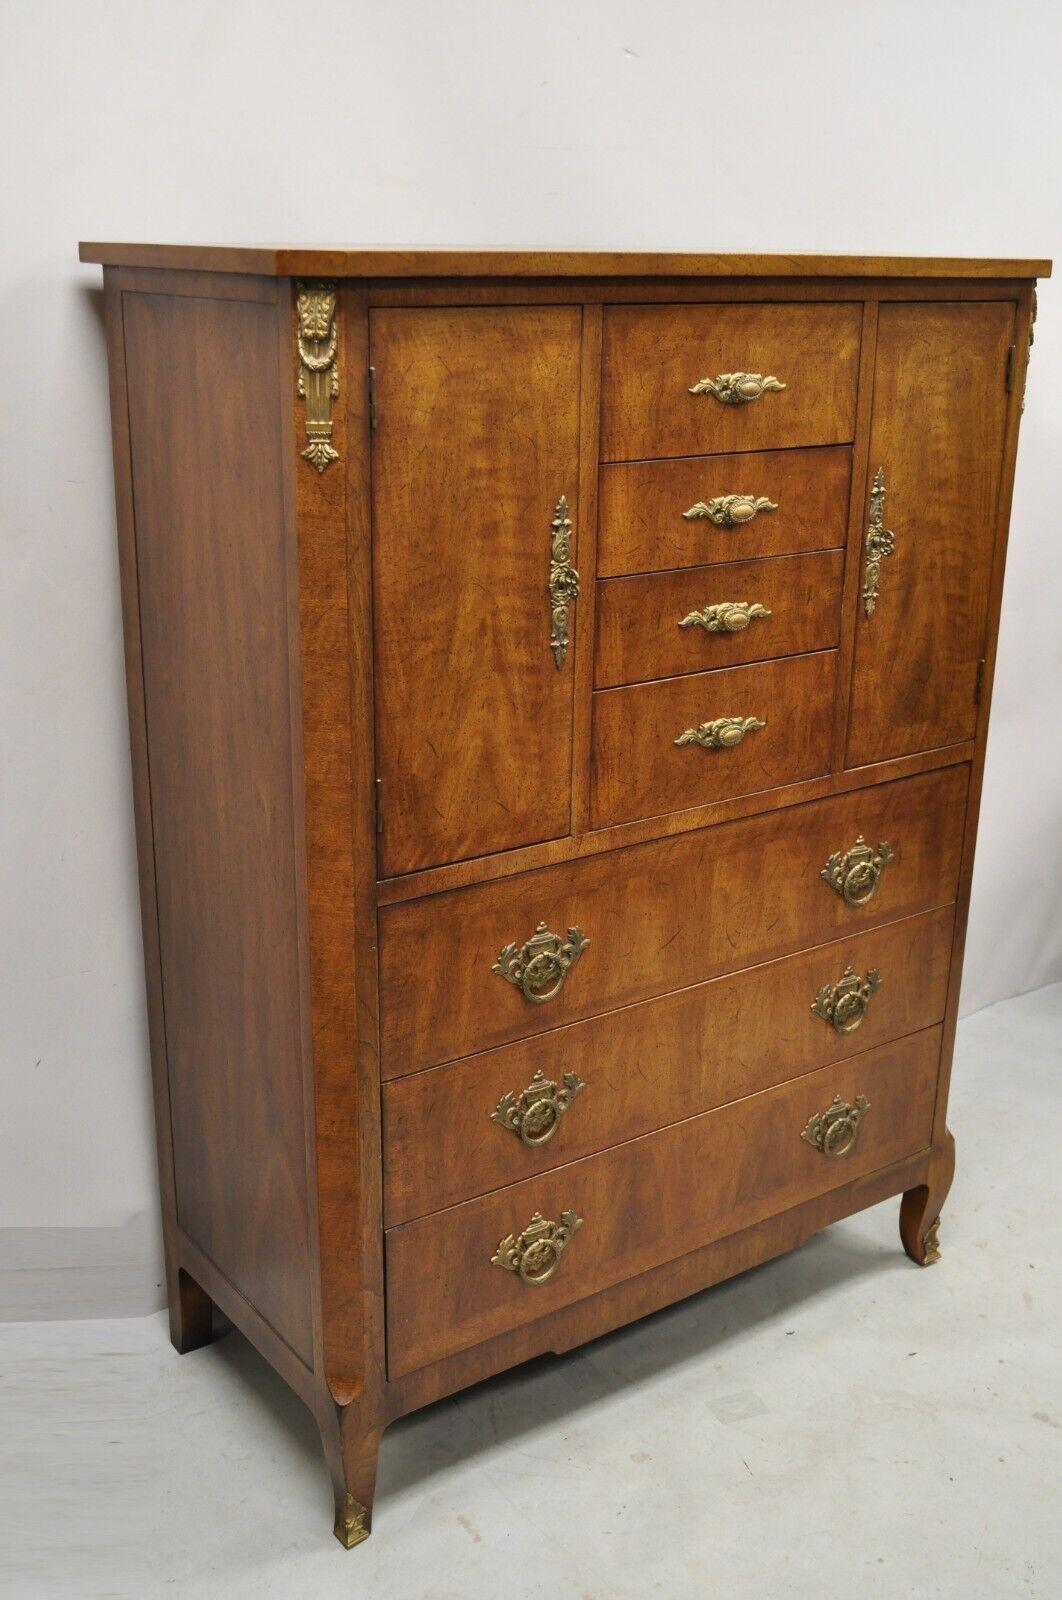 Vintage Henredon French Louis XV Style Banded Walnut Tall Chest Dresser. Item features an ornate brass ormolu, leafy scroll and urn form back plates, banded wood inlay to front and top, beautiful wood grain, 2 swing doors, original stamp, 7